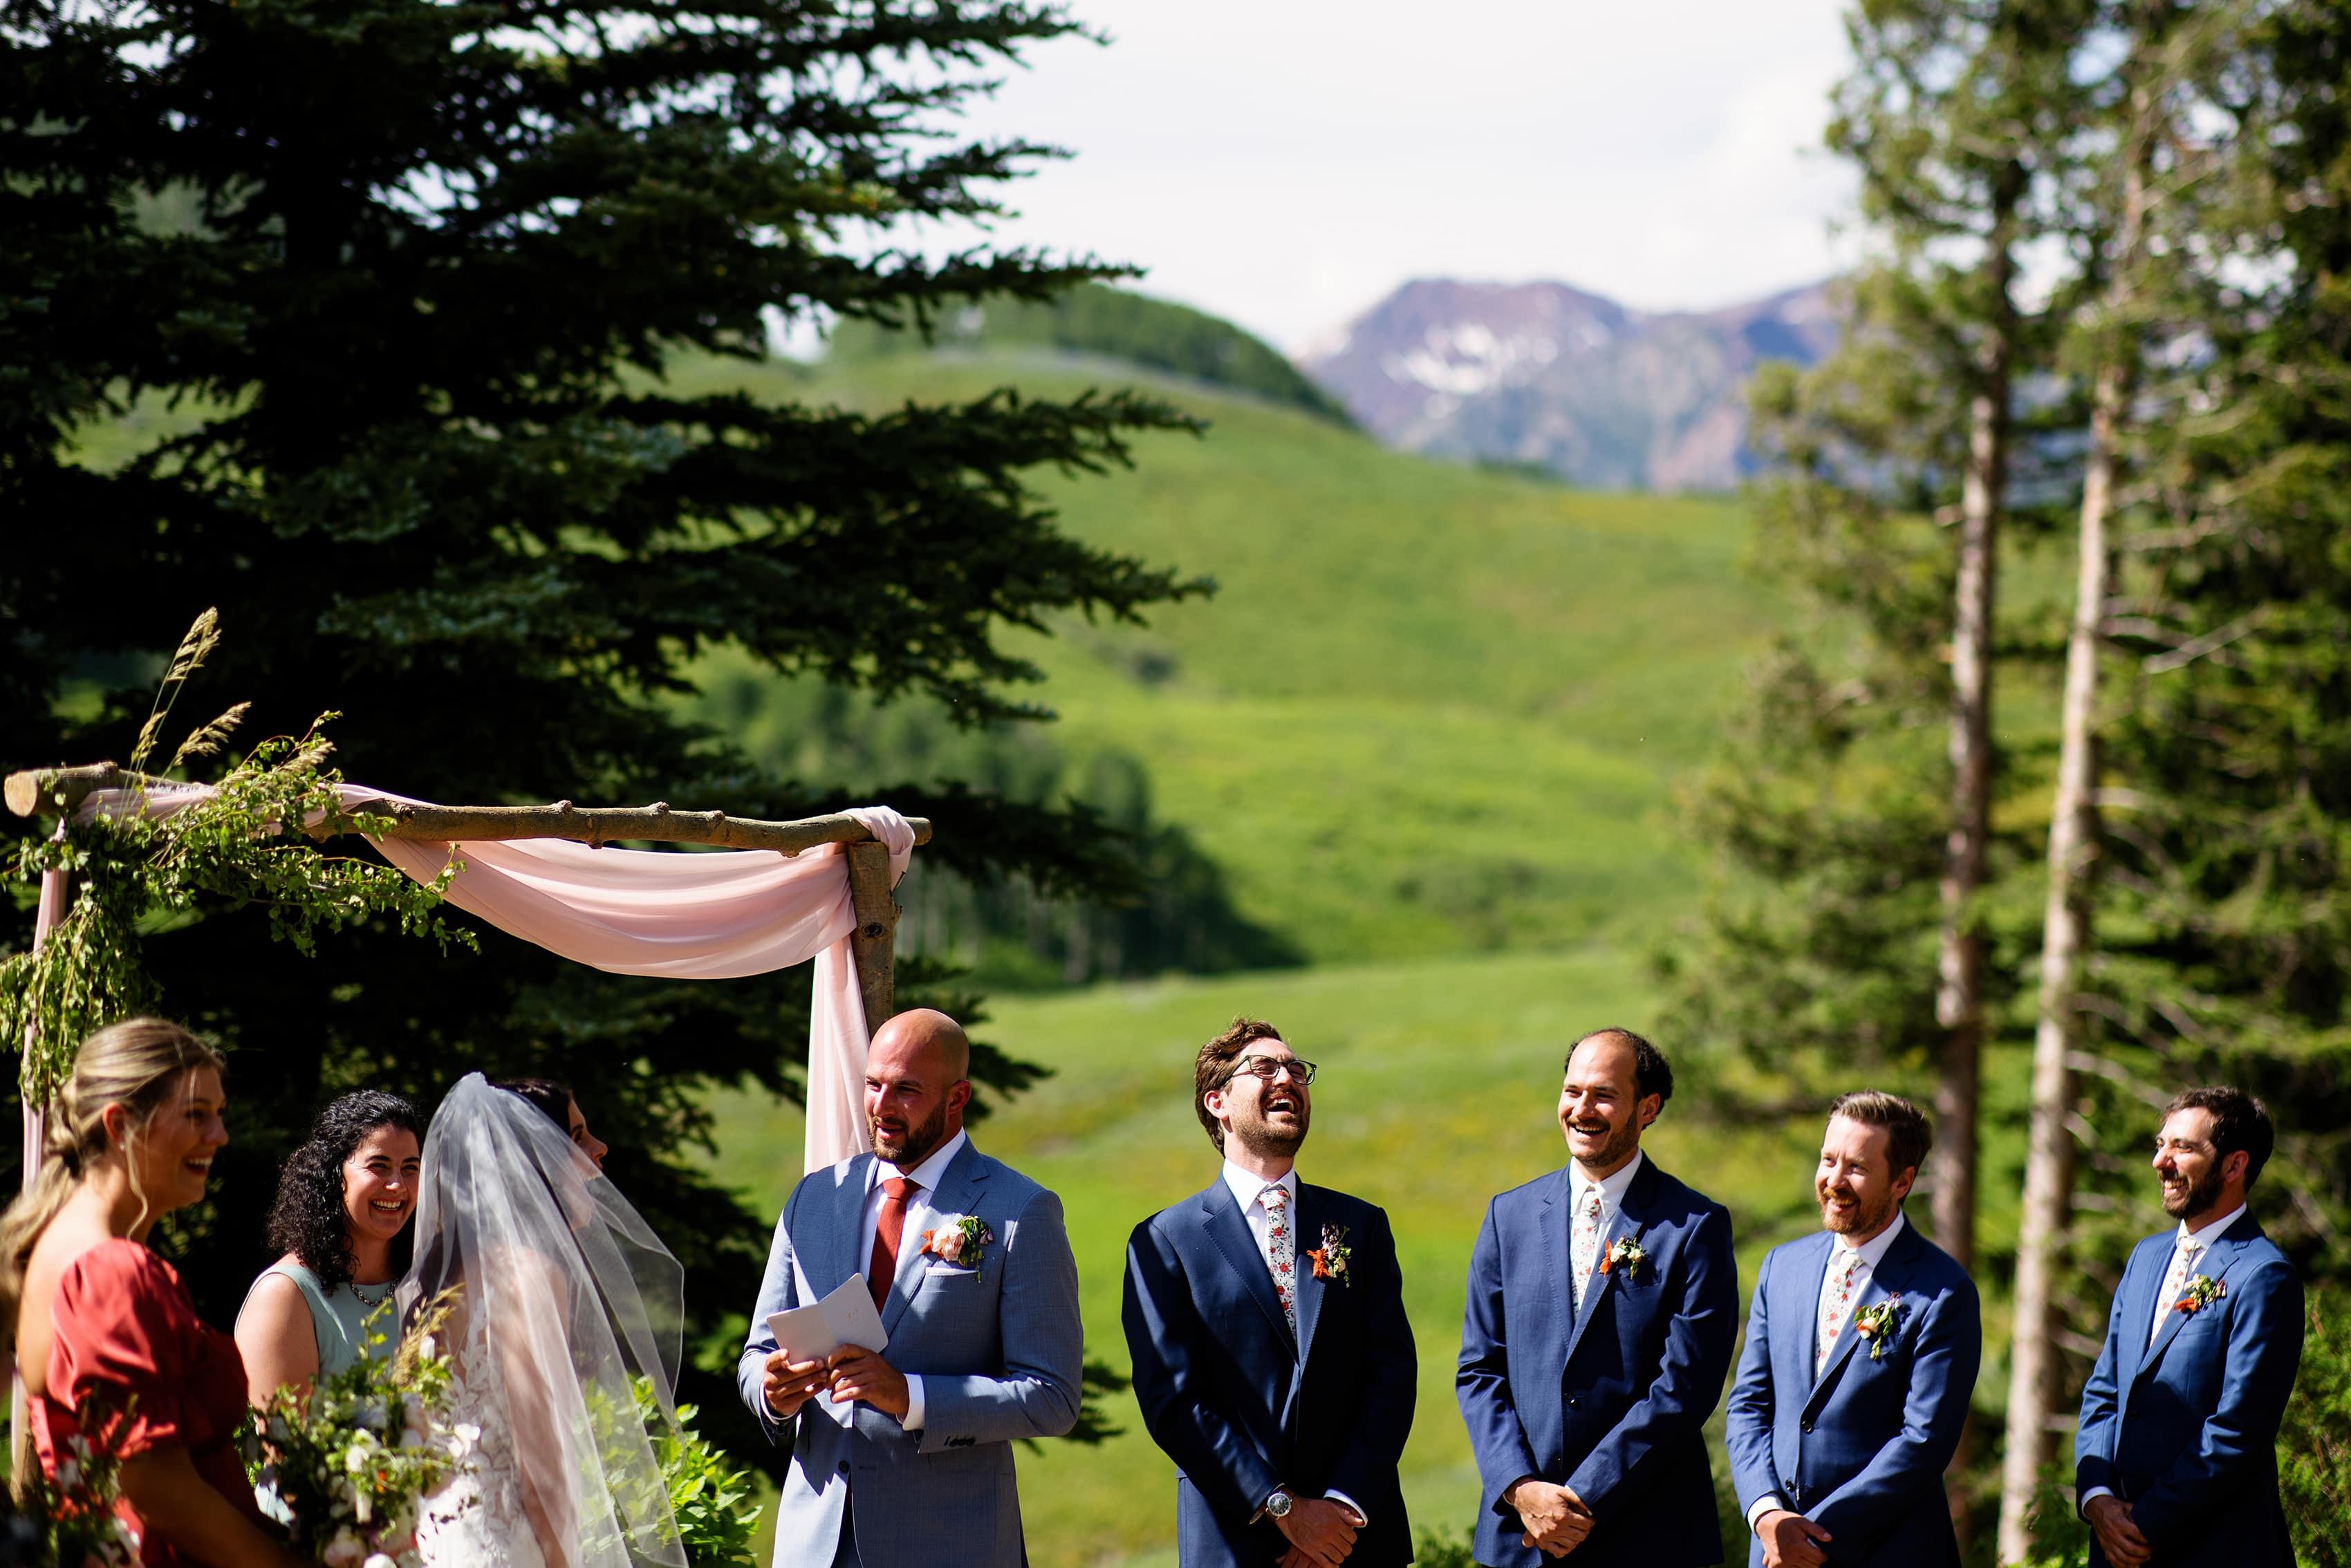 The groom reads his vows as the bride and groomsmen laugh